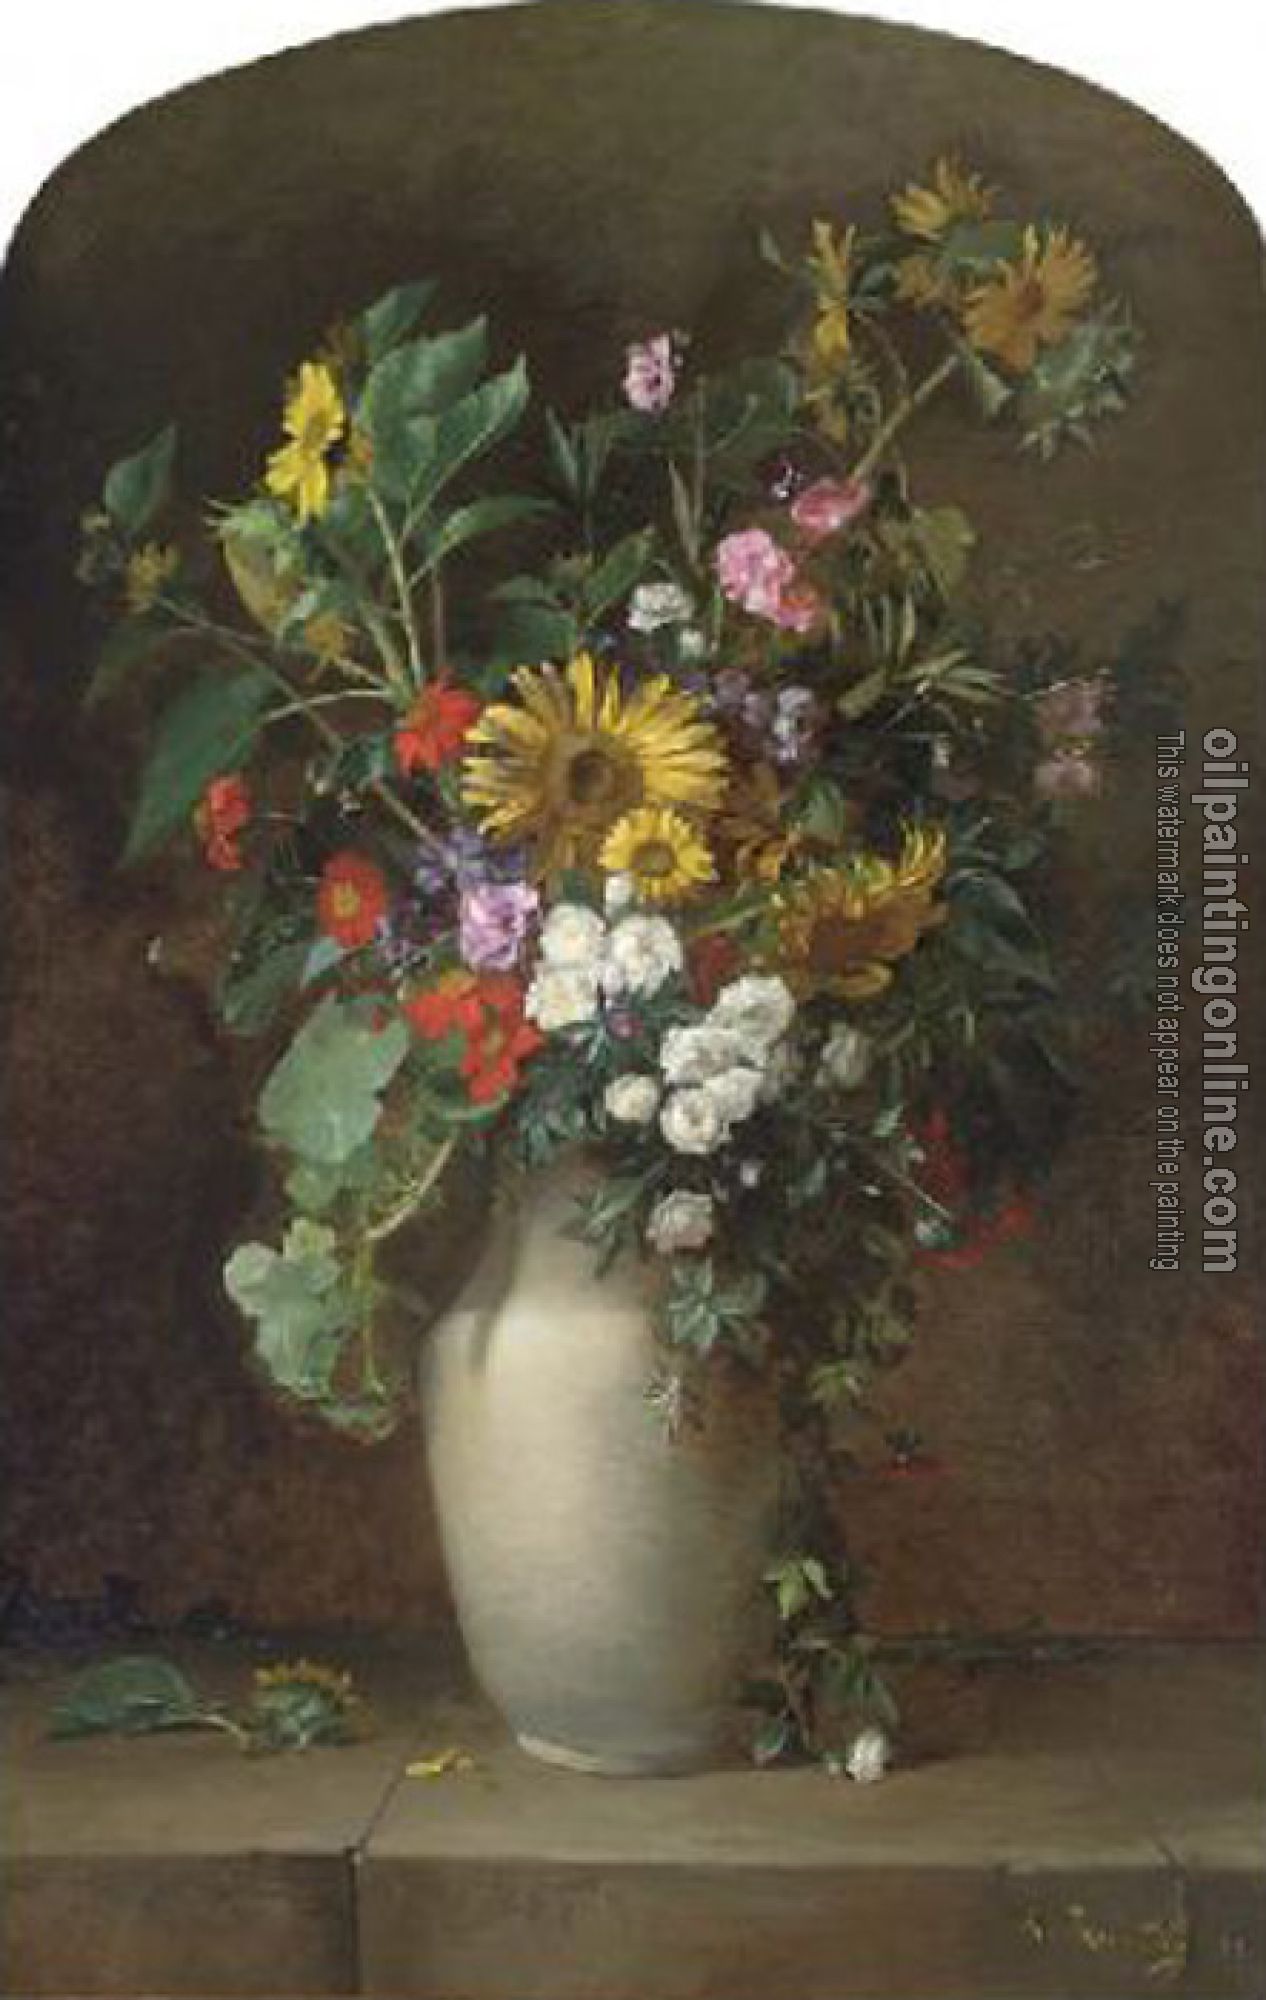 Renaudin, Alfred - Sunflowers, roses, and other summer blooms in a vase on a stone ledge